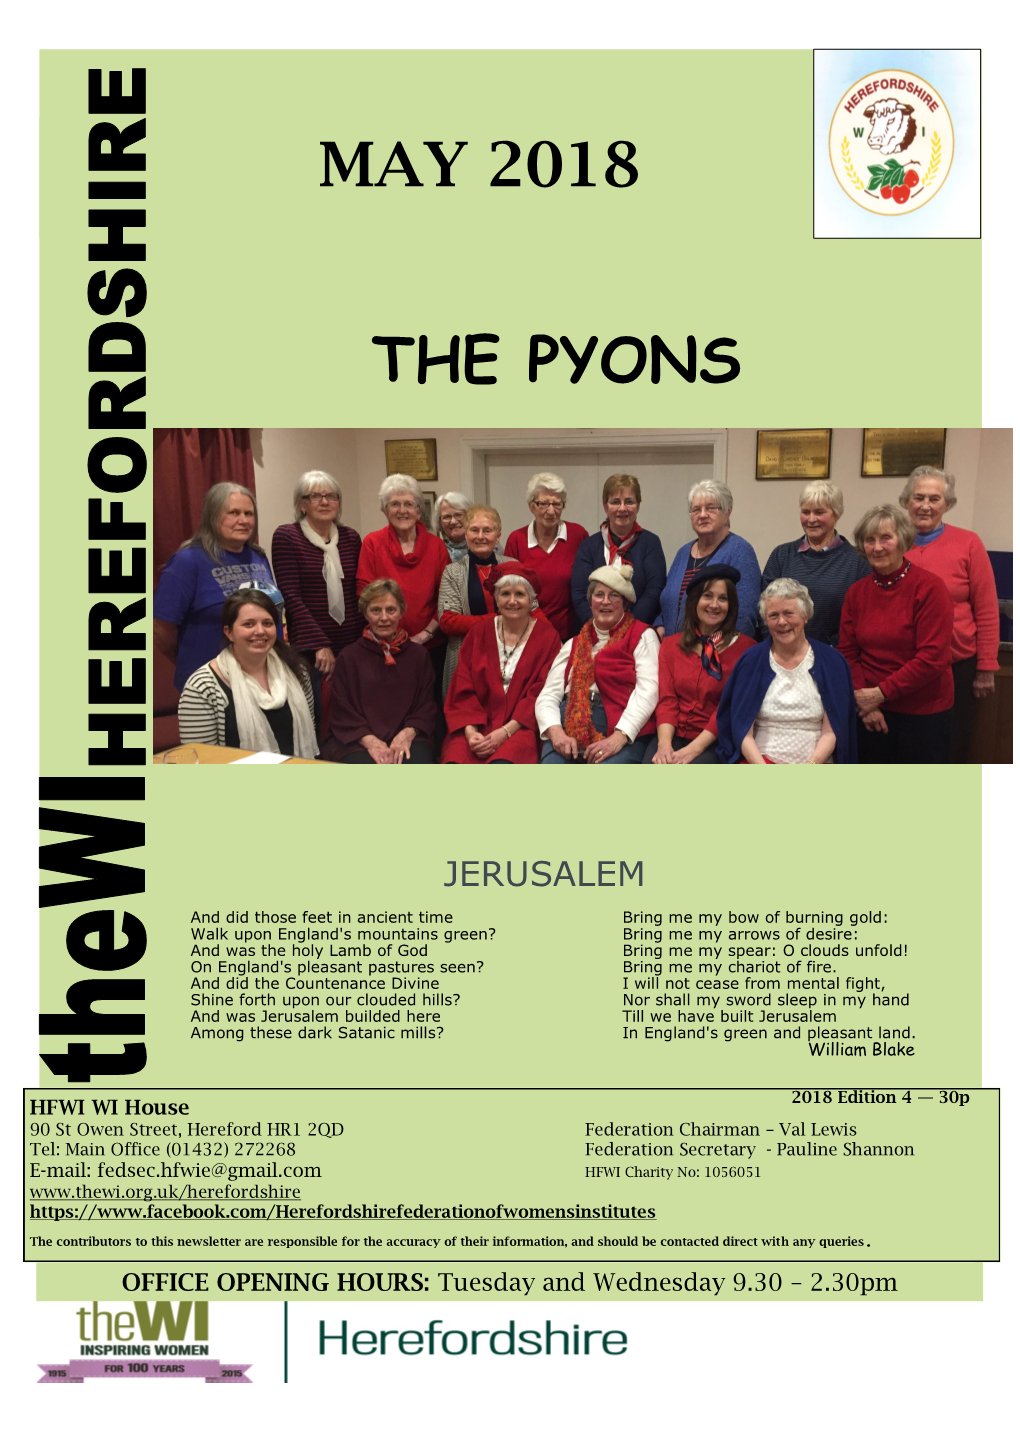 May 2018 the Pyons